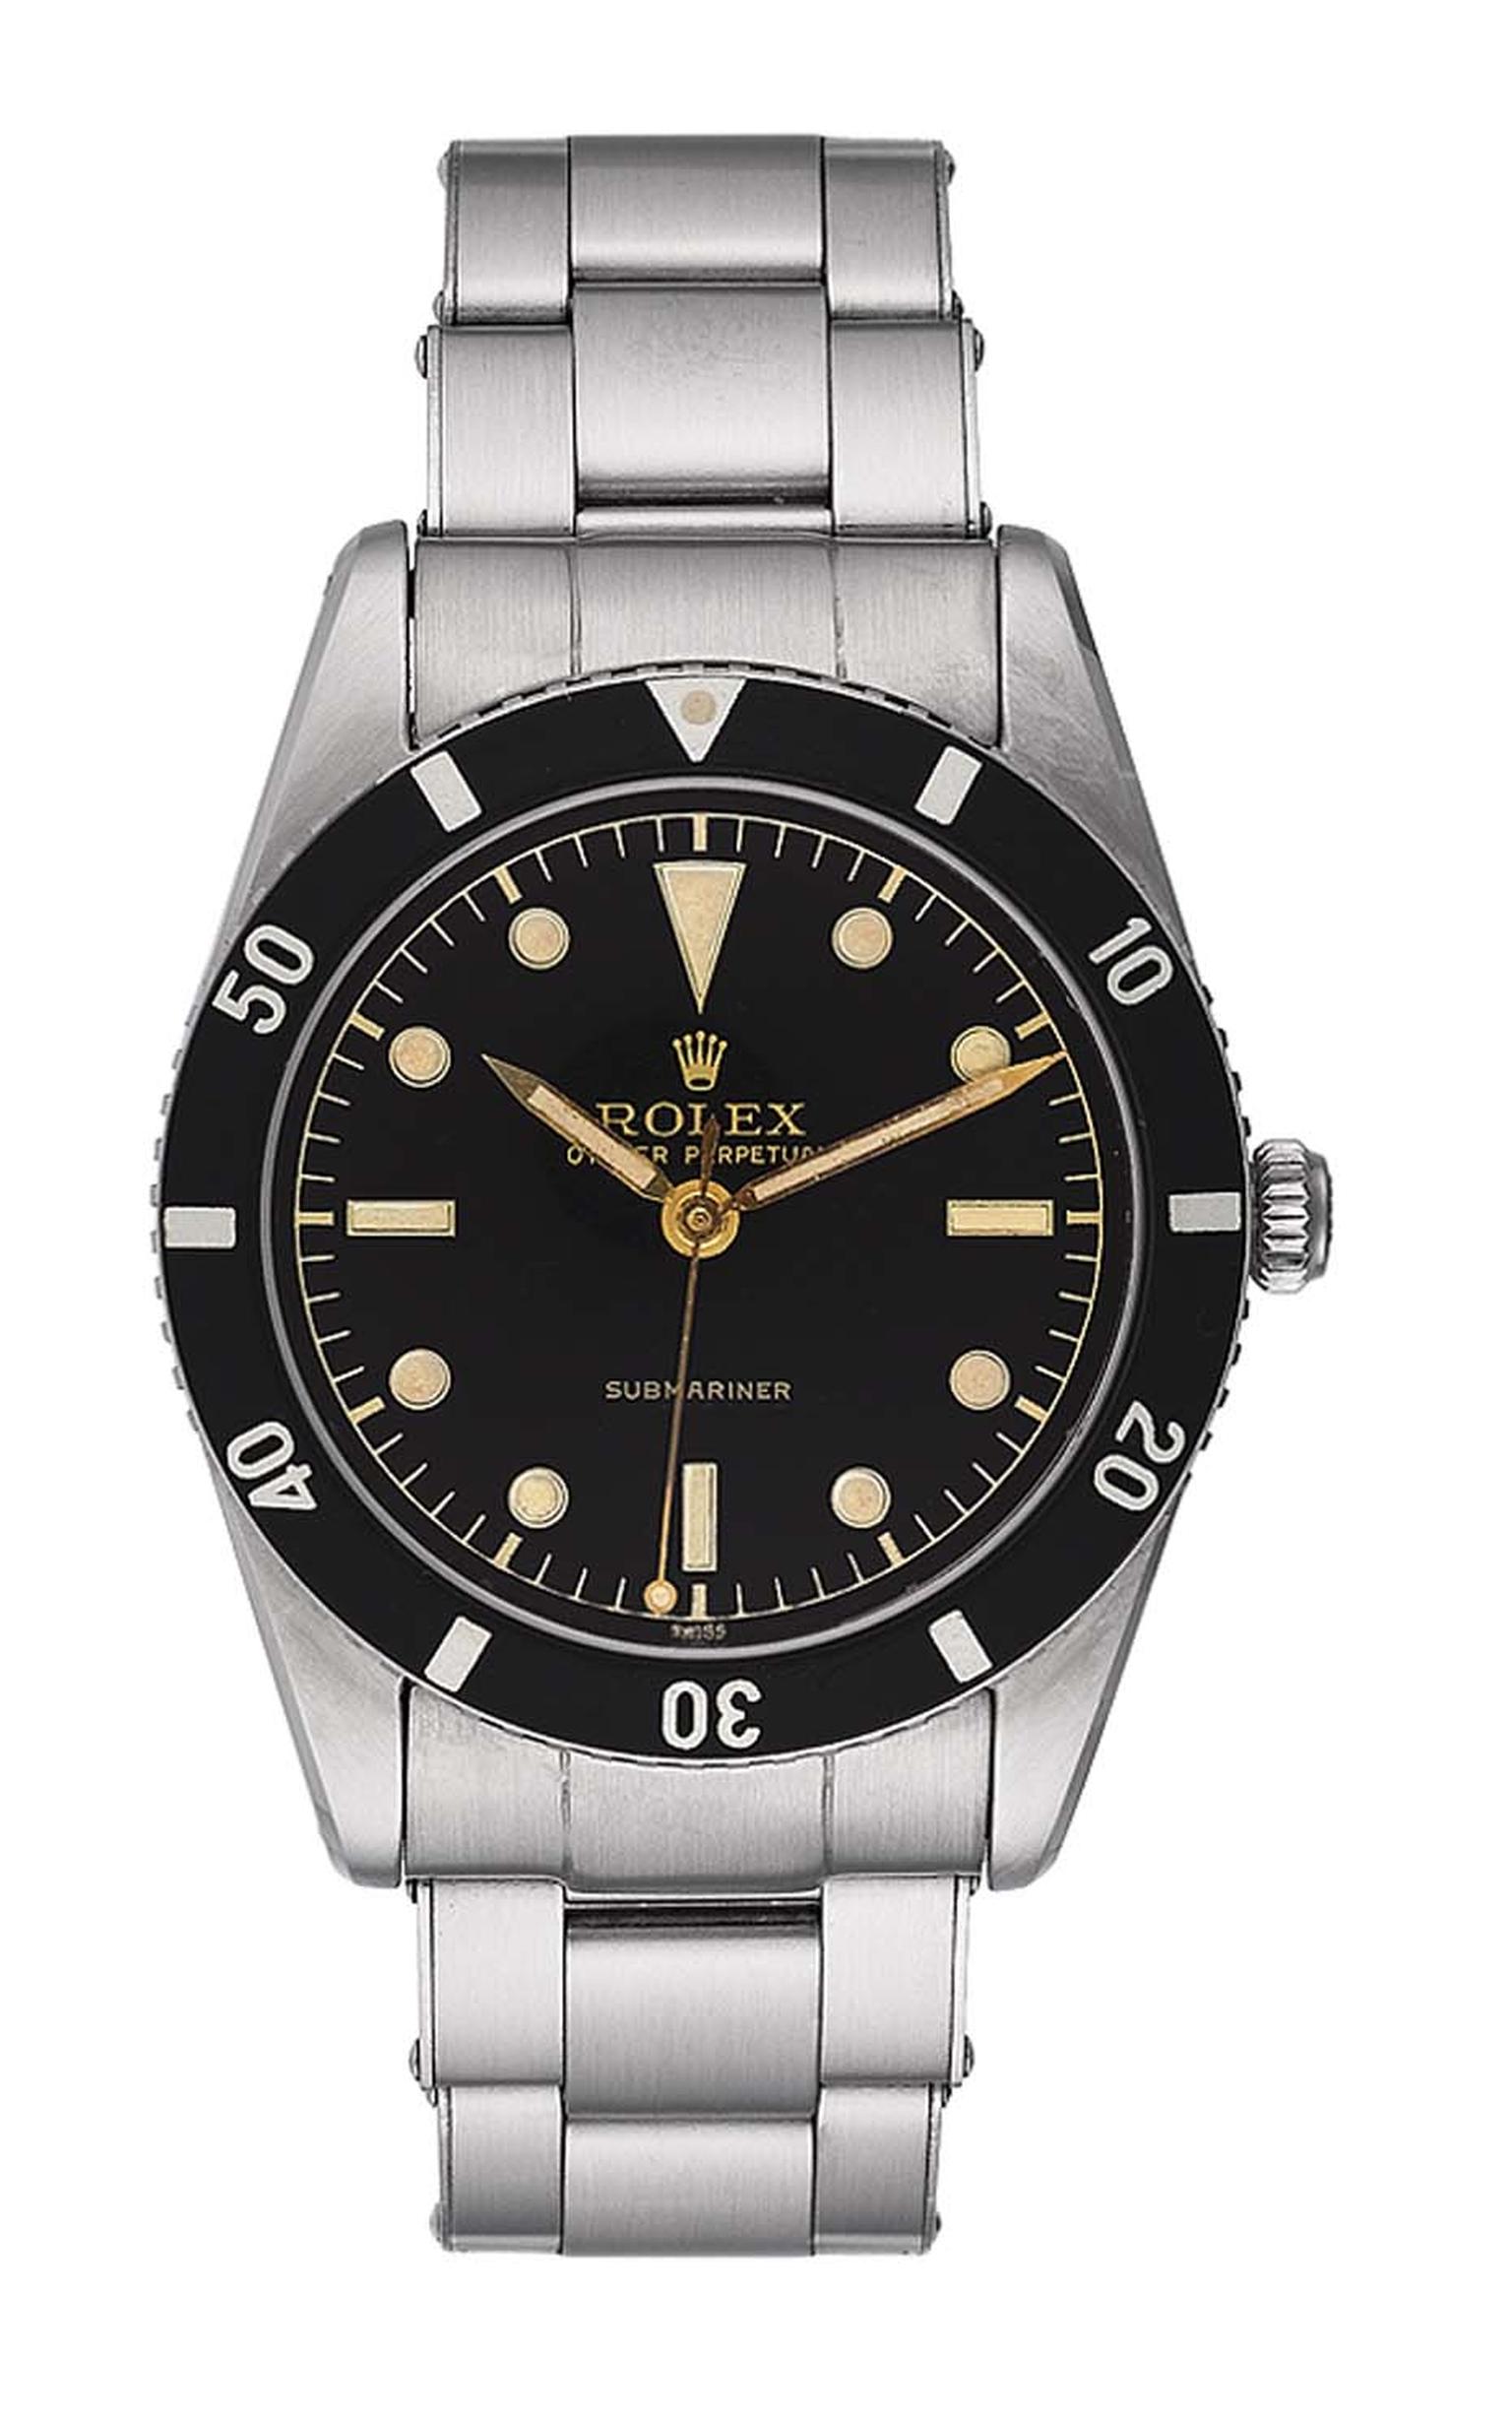 The very first Rolex Submariner dive watch, launched in 1953.